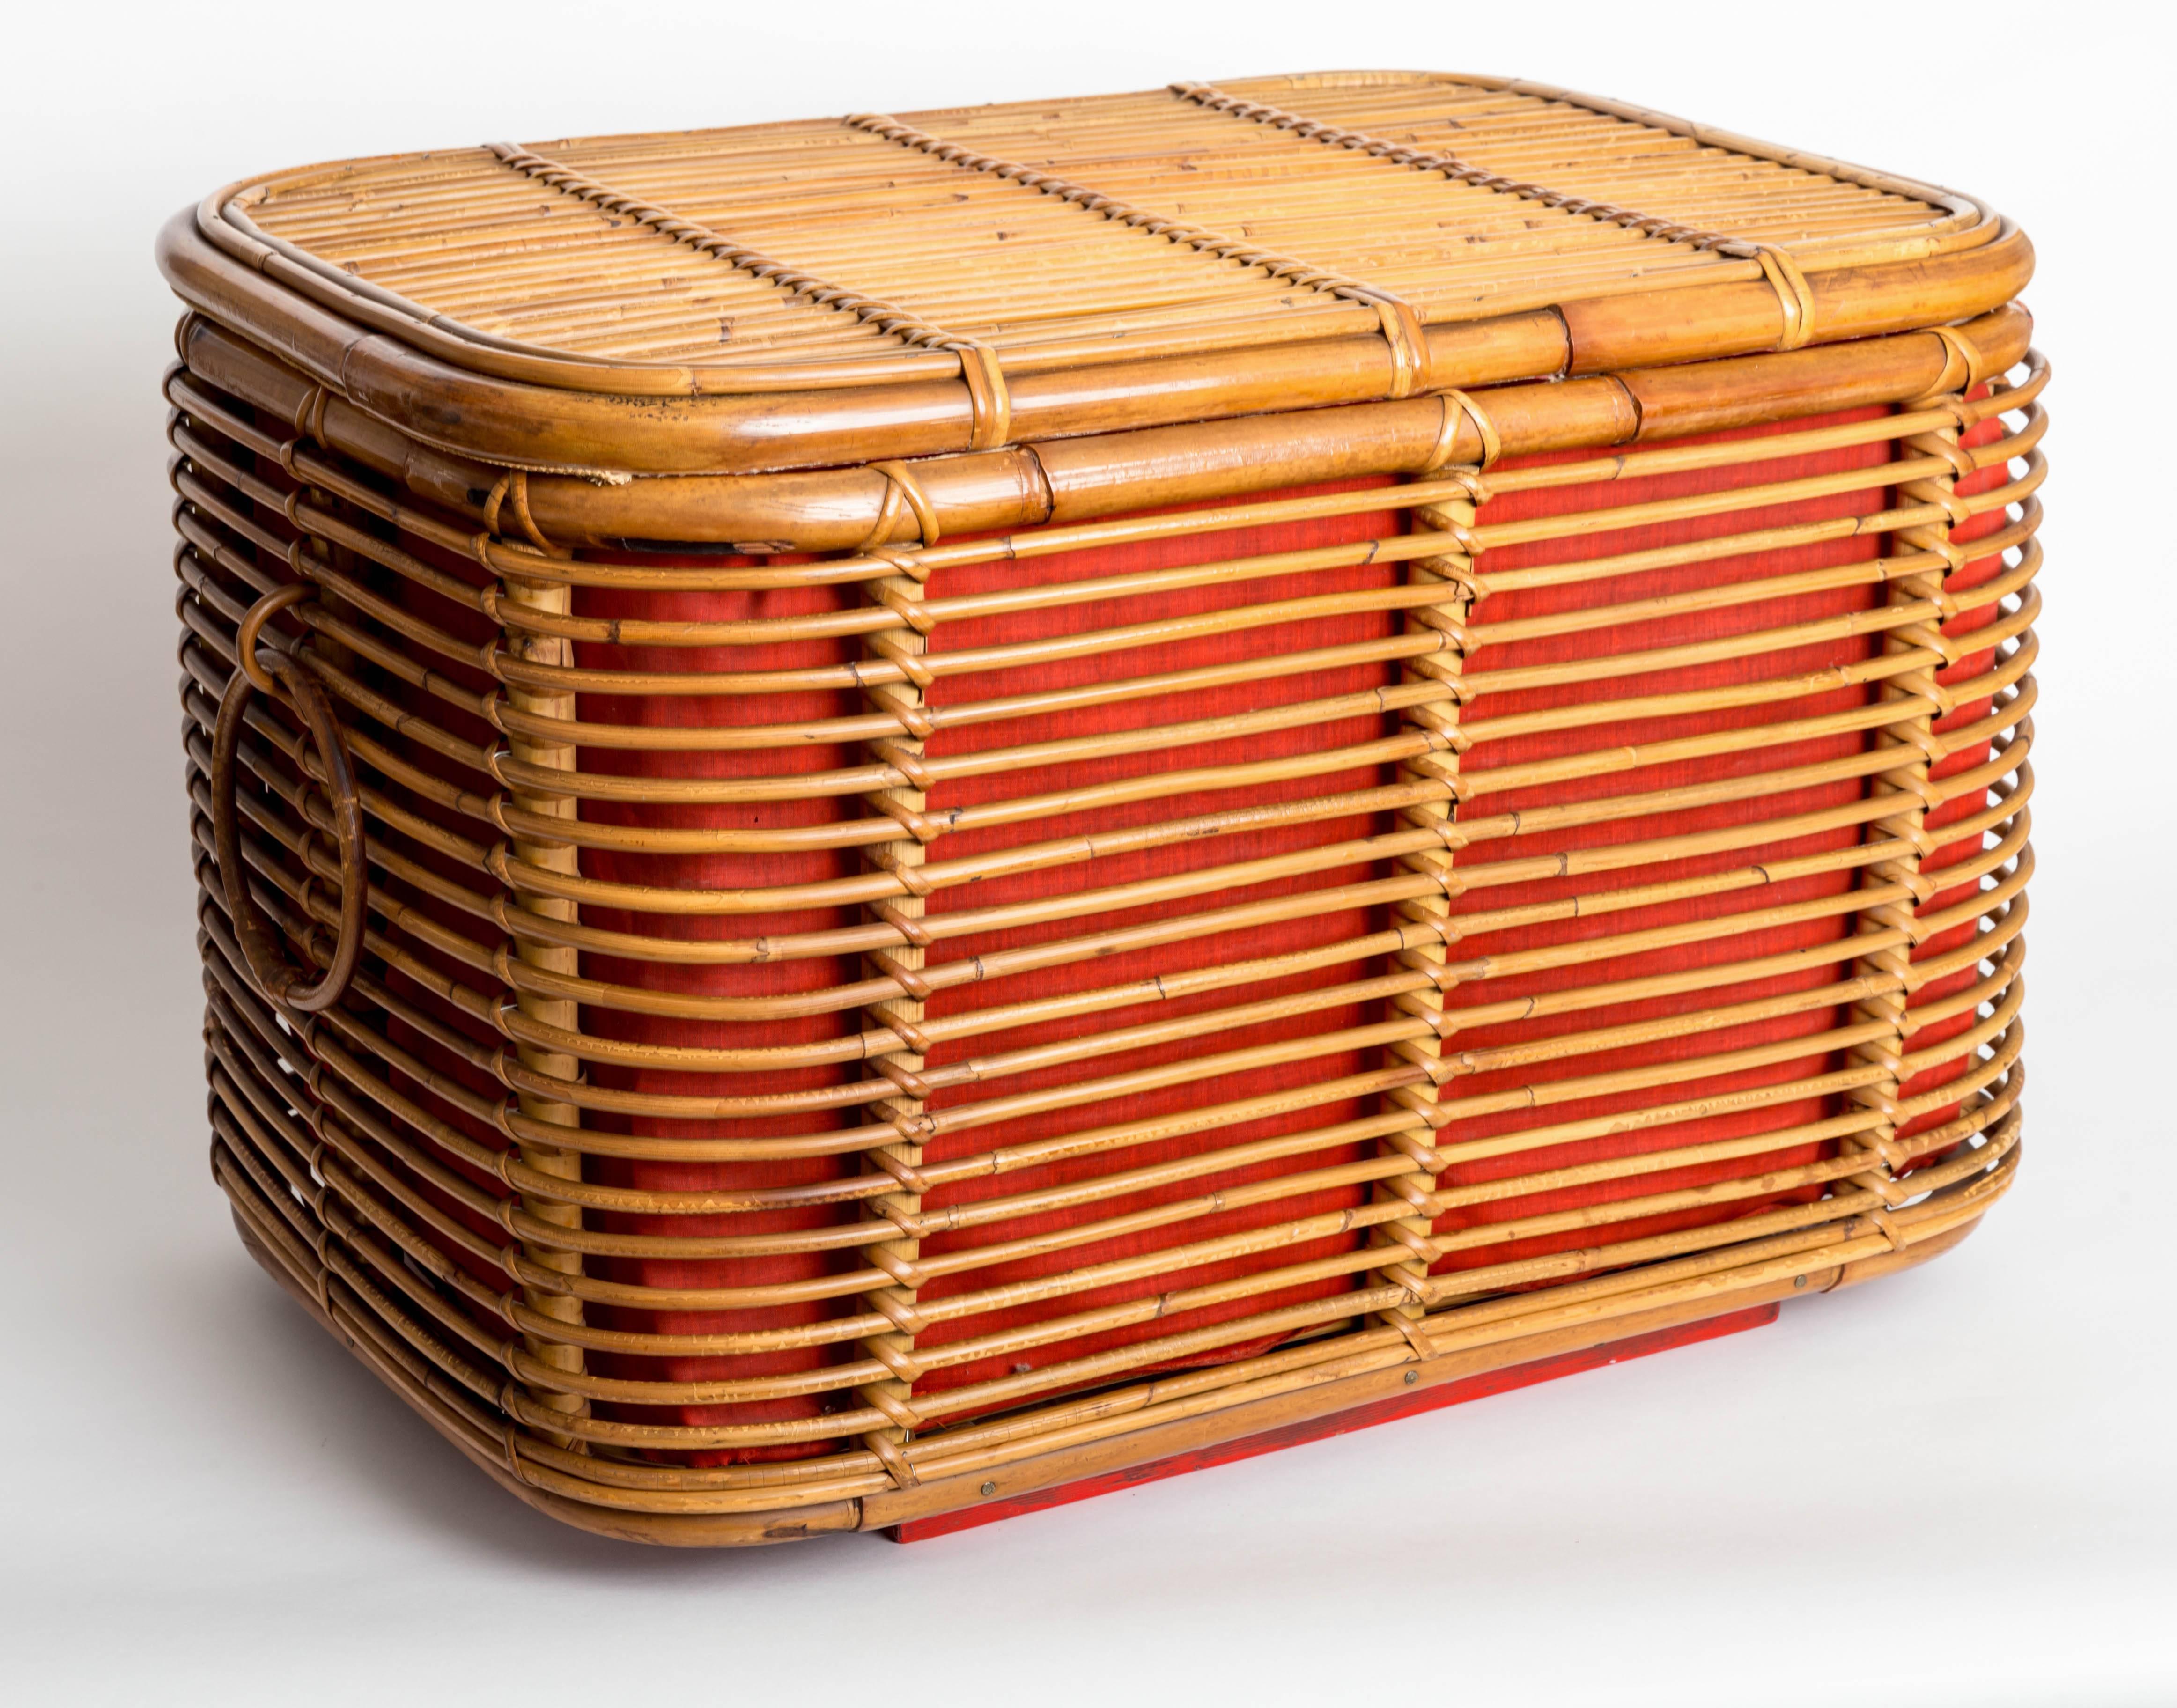 Rattan ottoman or storage chest with fabric lining.